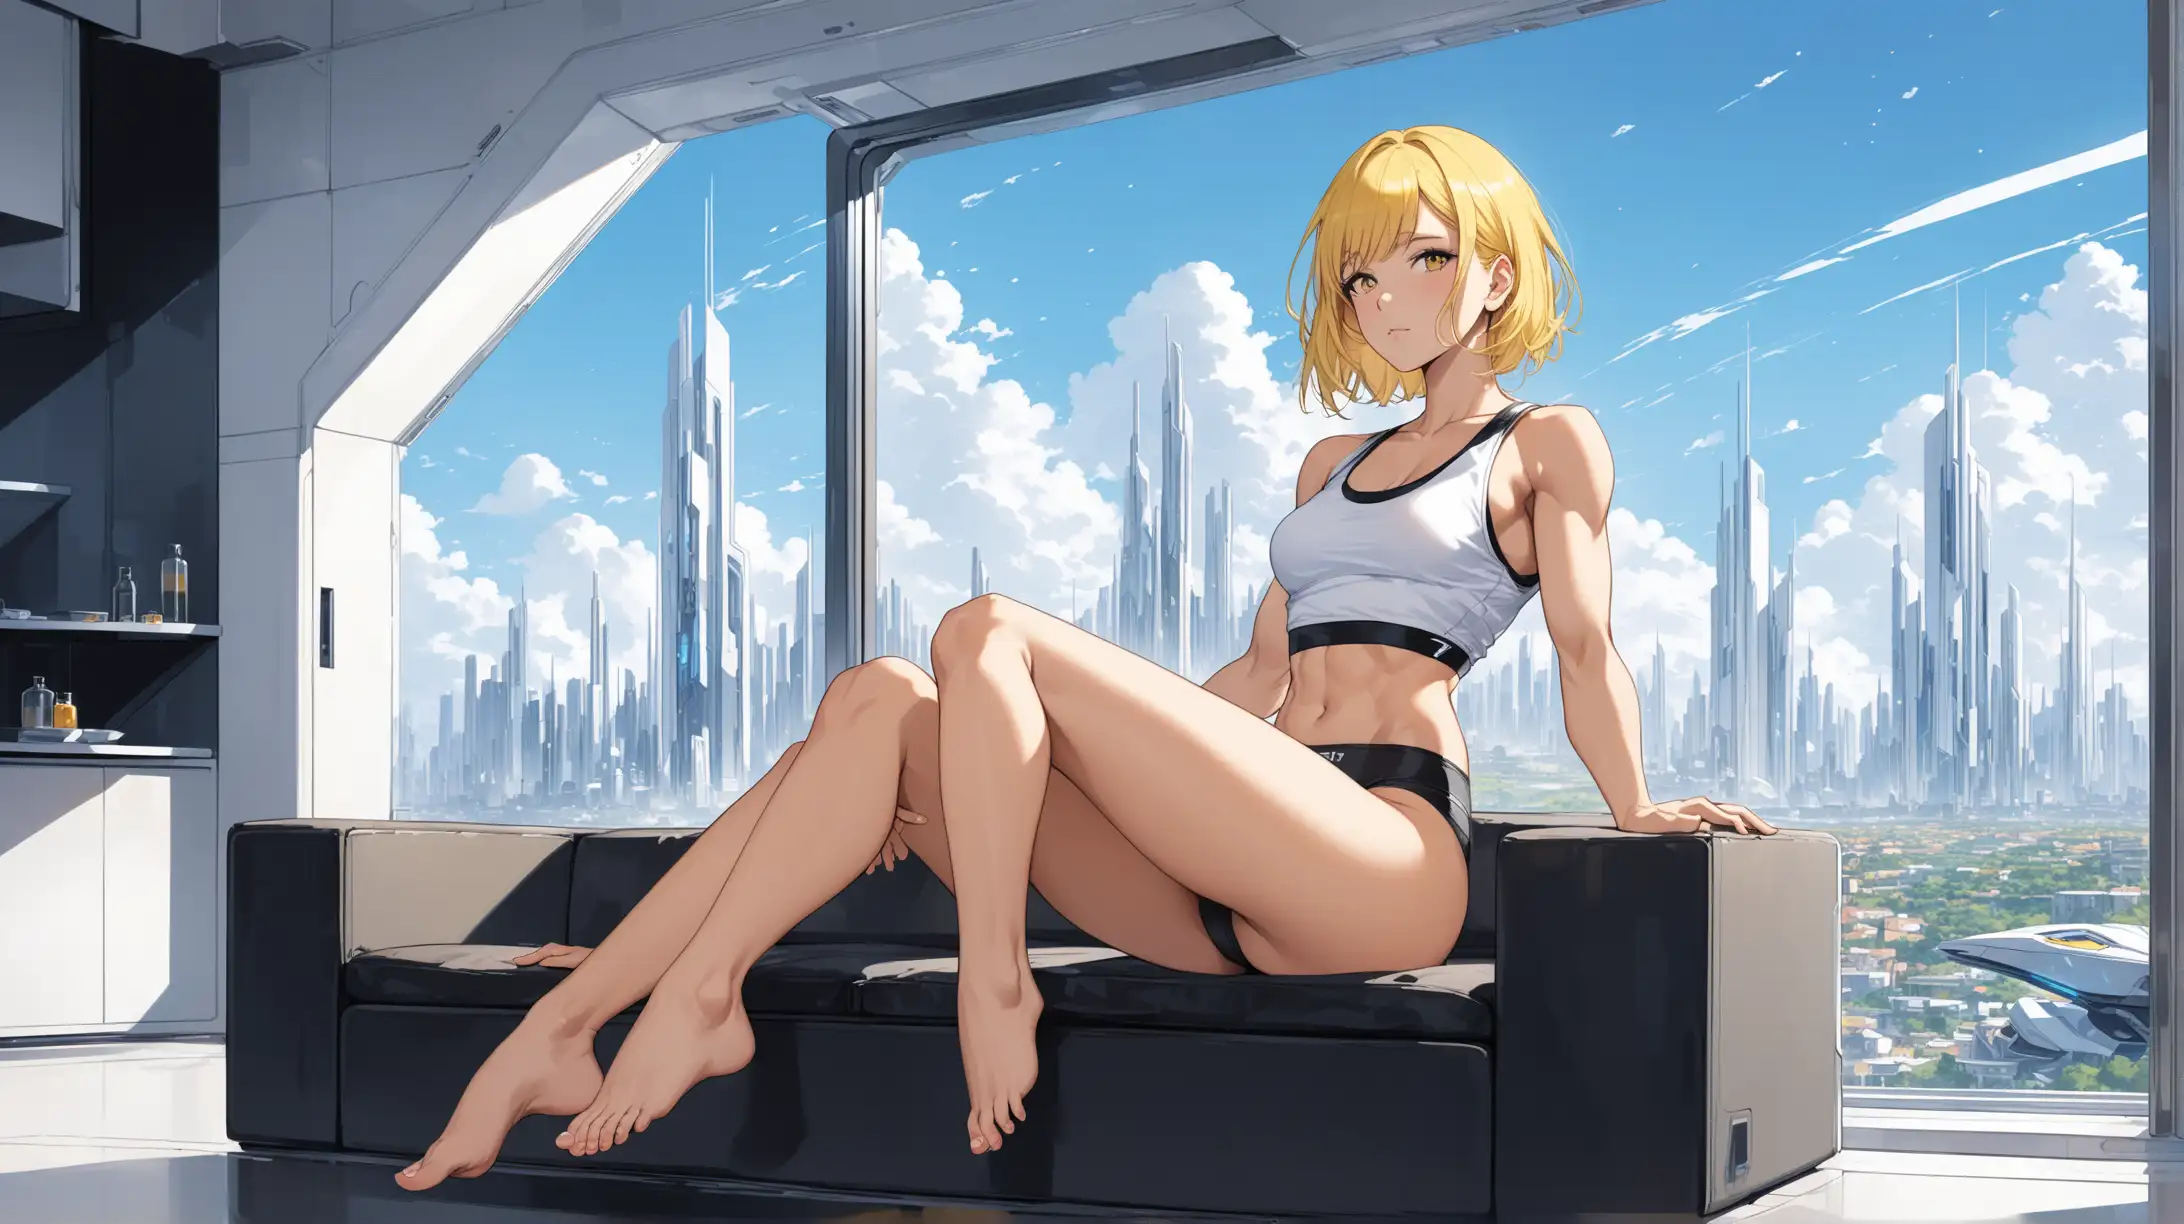 Futuristic Heroine Relaxing in Minimalist Apartment with City View